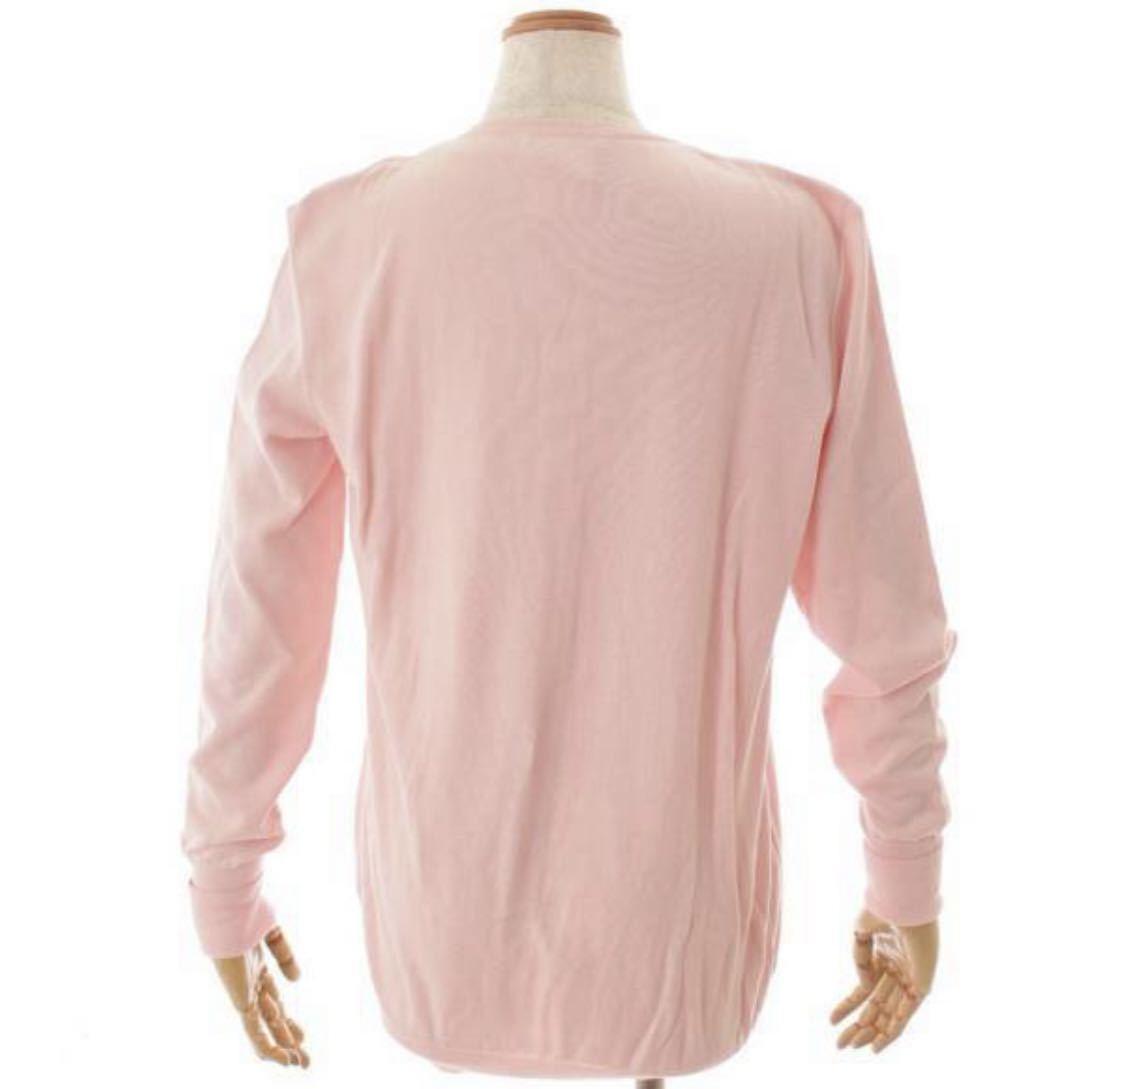  Chanel ensemble Chanel cardigan Chanel knitted baby pink 42